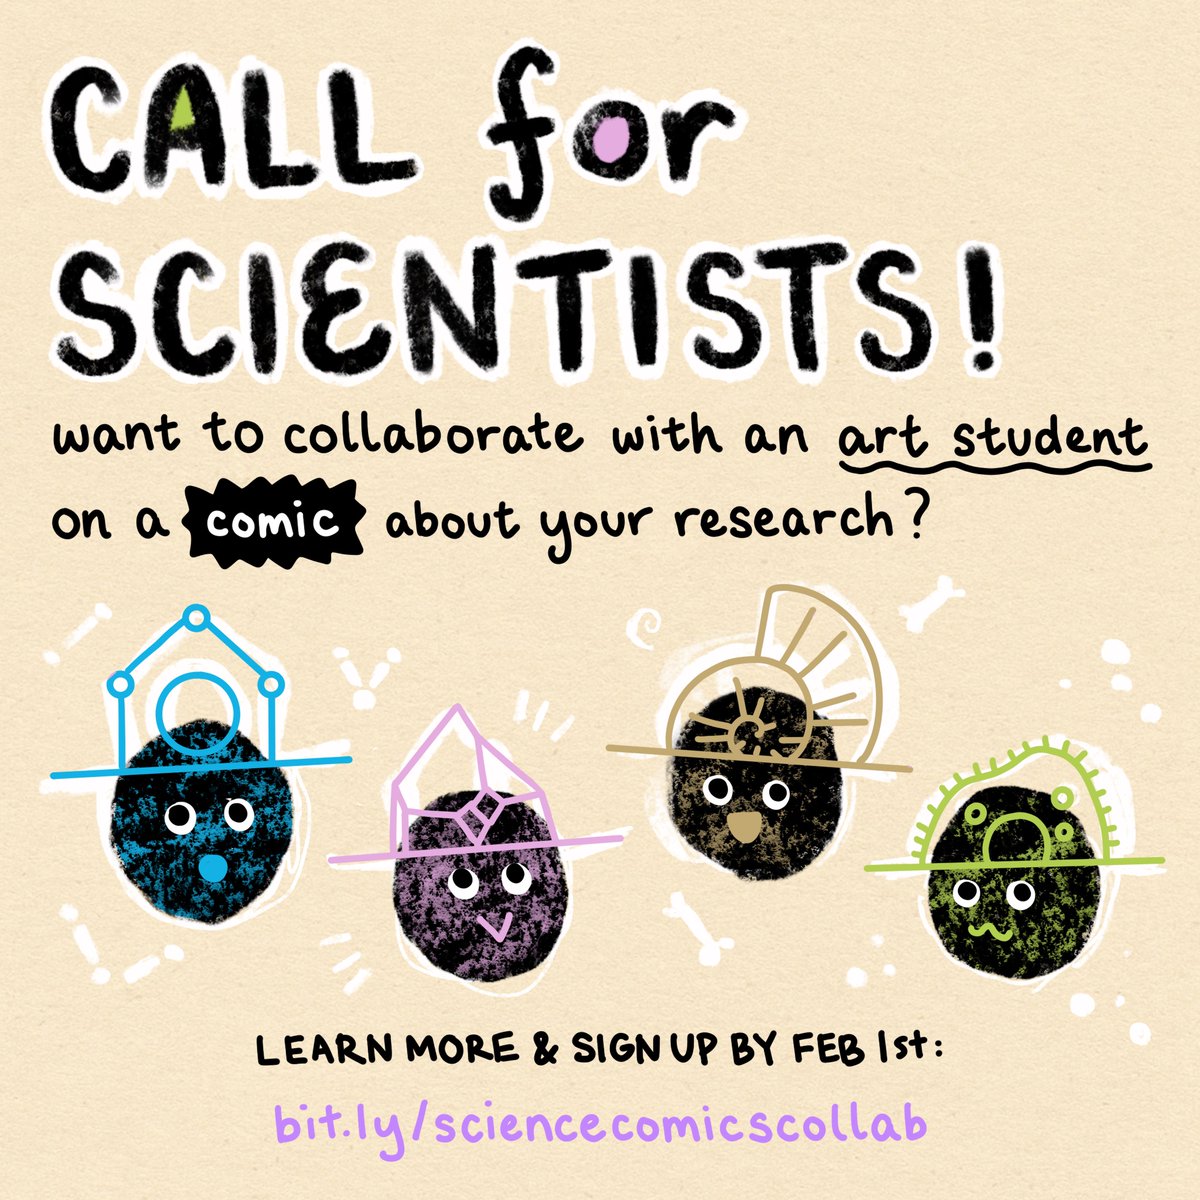 Seeking scientist volunteers! Want to practice science communication and help author a ✨comic✨ about your research? I need collaborators for this spring's cohort of SciComm & Comics art students! Please share widely. #STEMeducation #Science #sciart